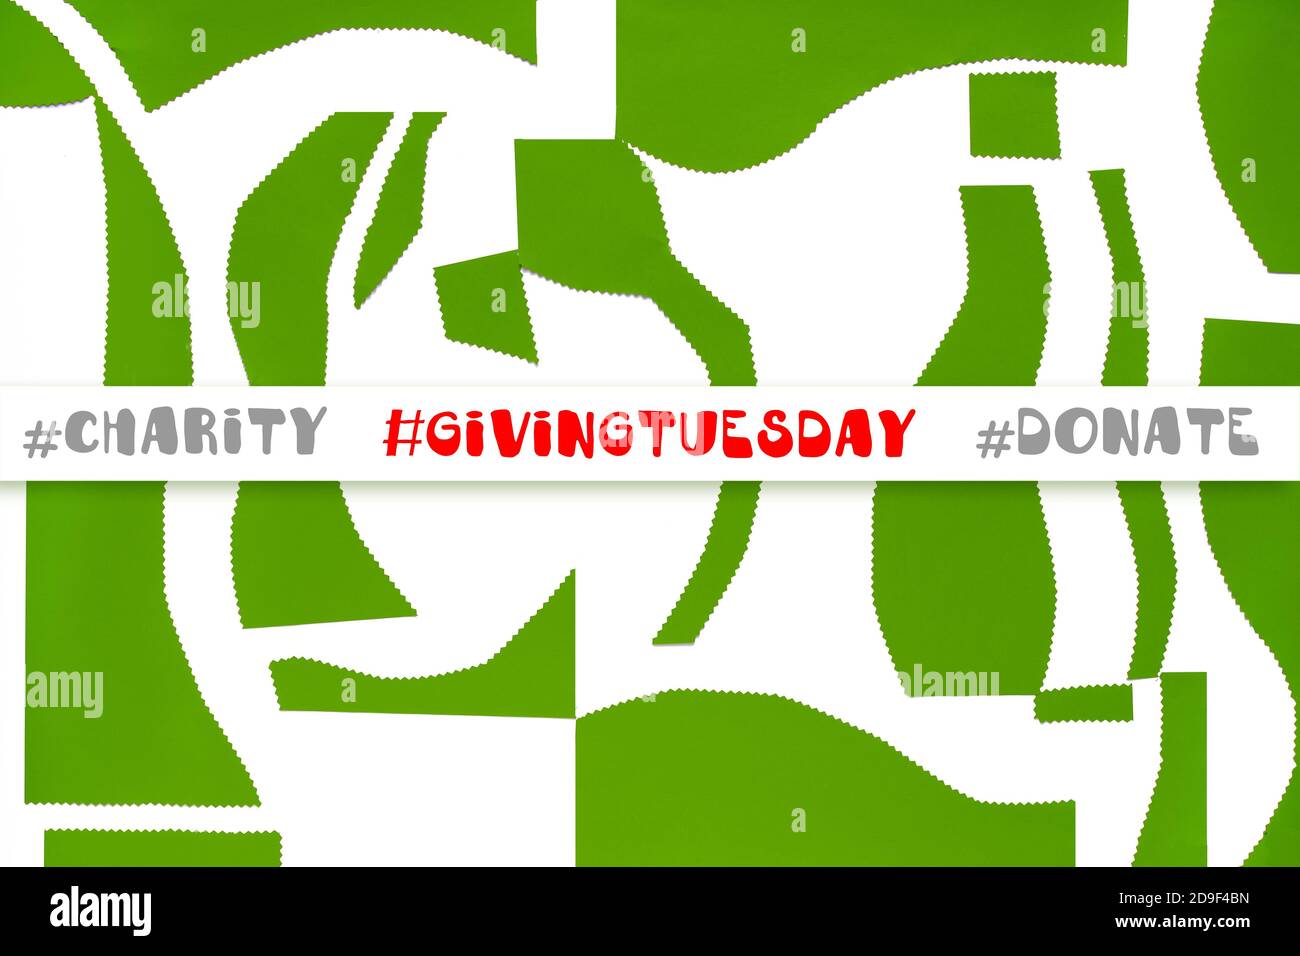 Giving Tuesday concept. Text with hashtags Givingtuesday, charity, donate on abstract background. Stock Photo